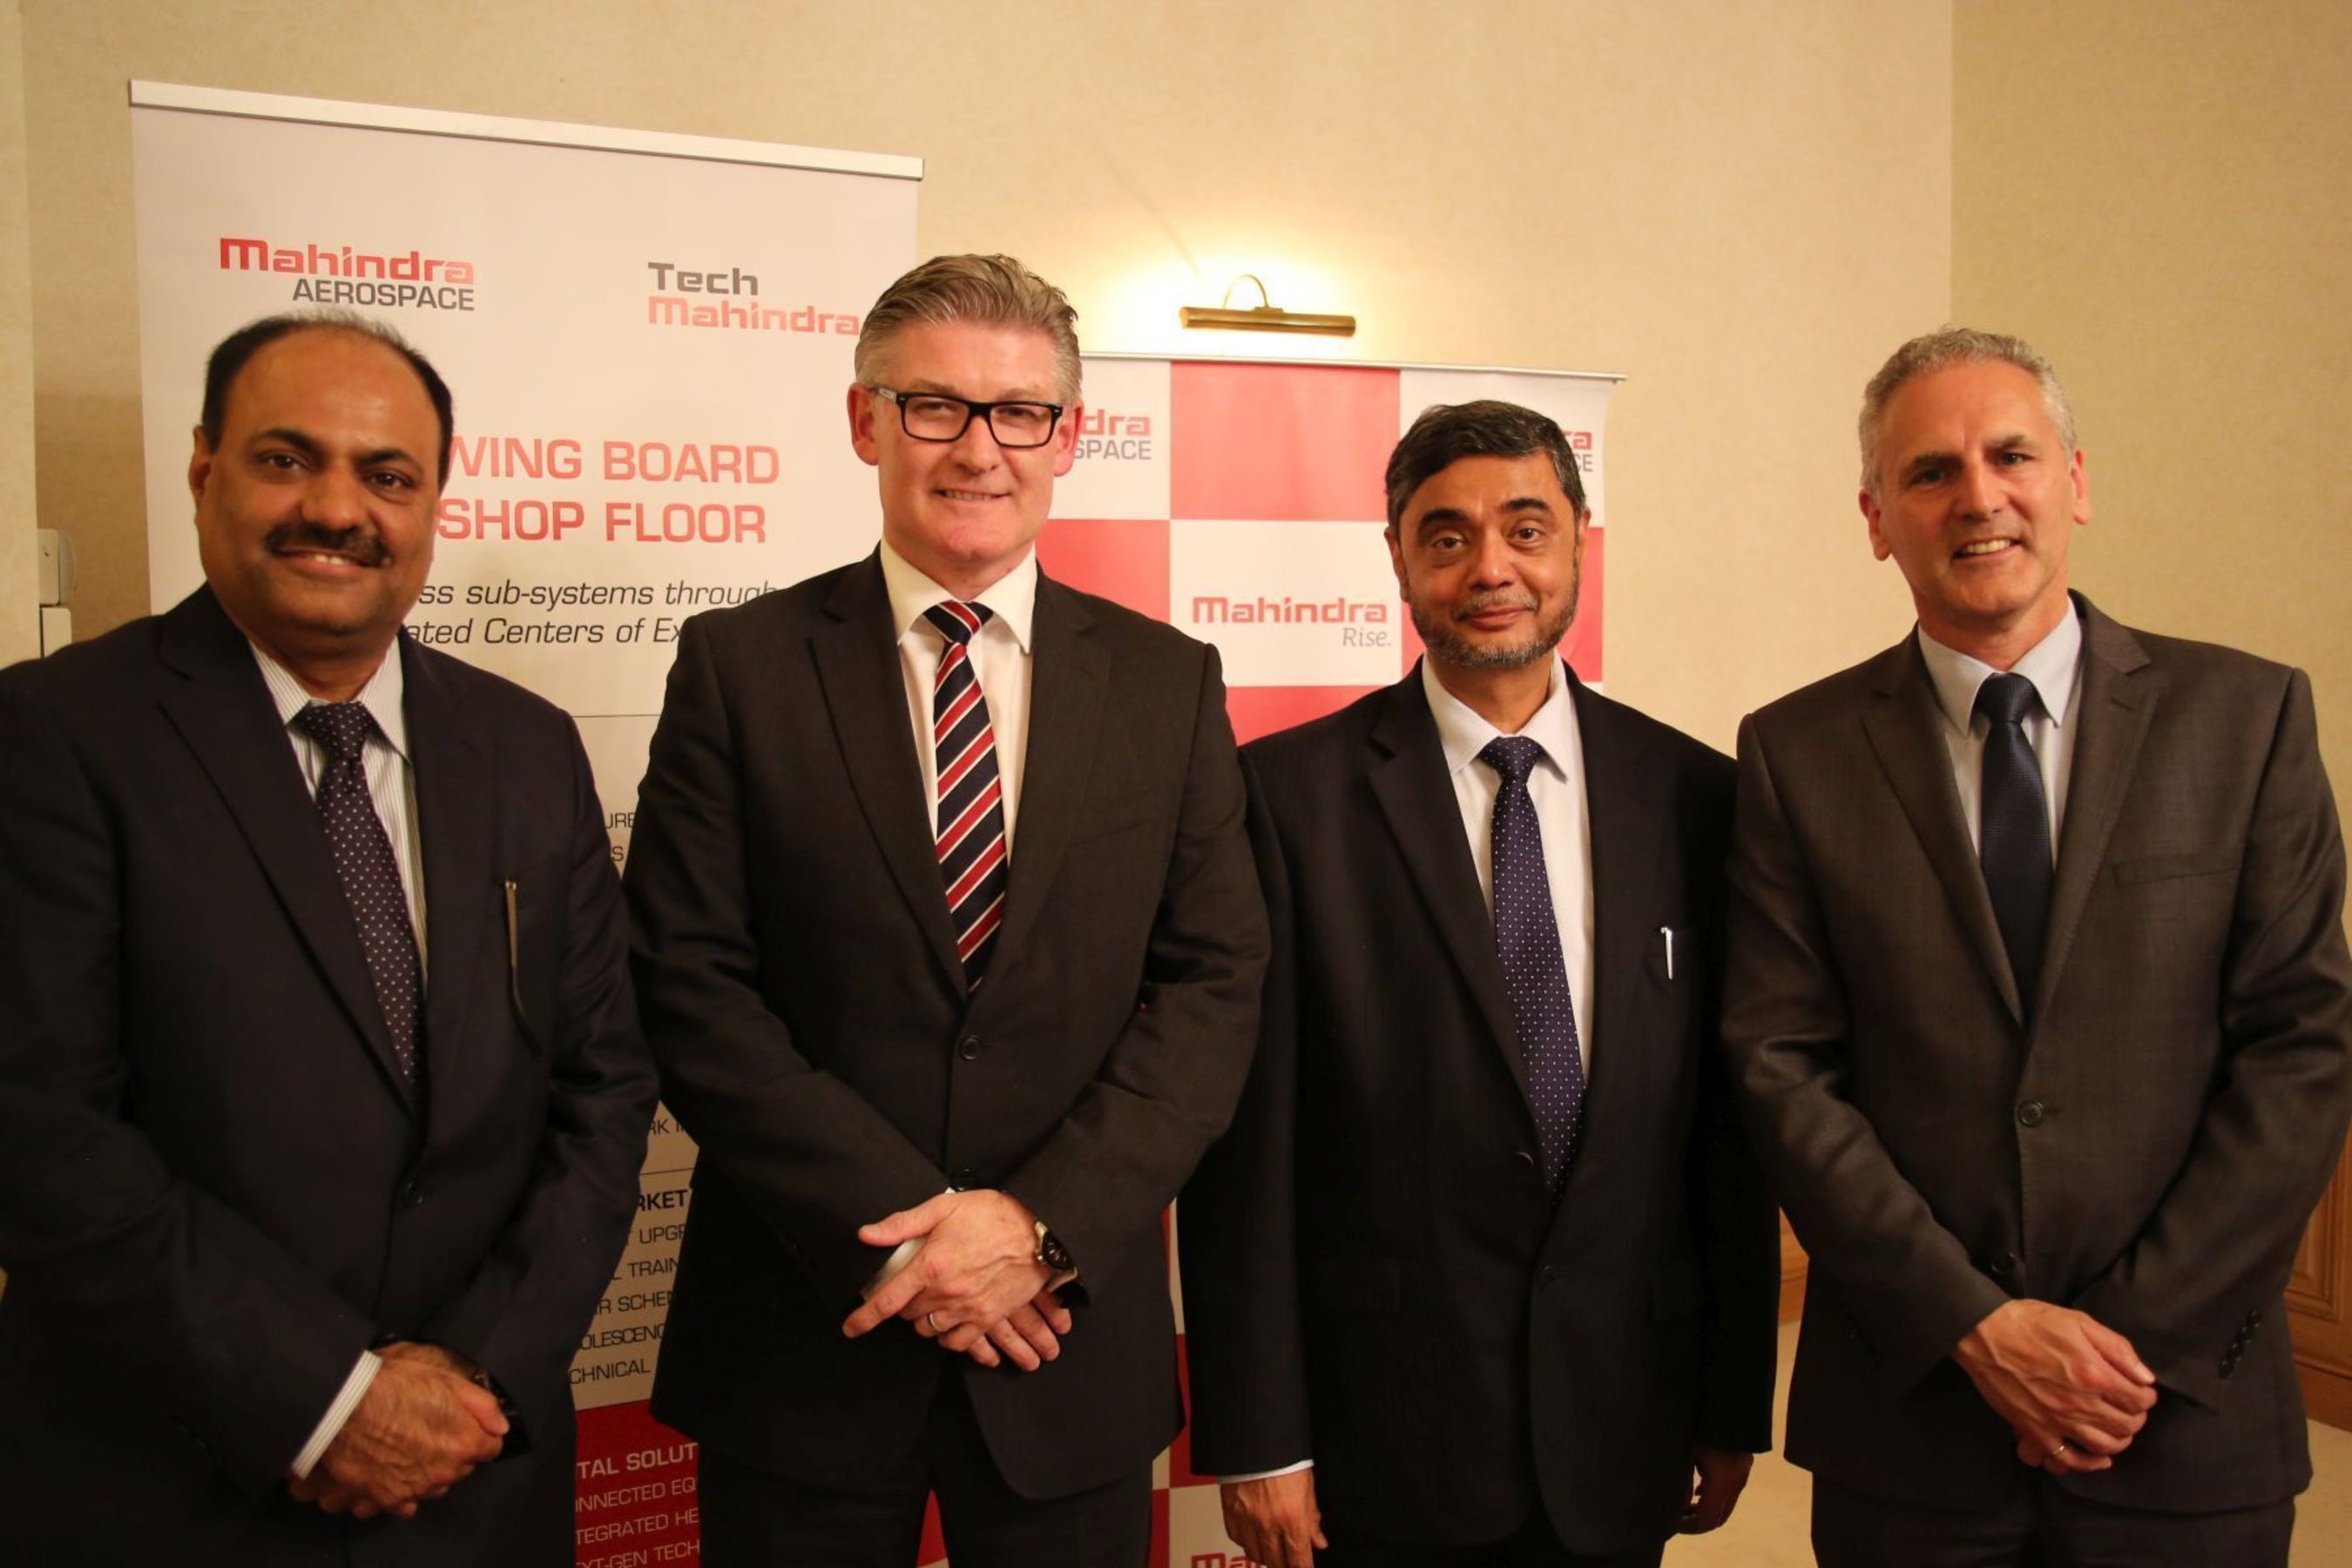 L-R: Arvind Mehra, Global CEO, Mahindra Aerospace; Frank Rainford, Executive Product Leader Aerostructures, GE Aviation Systems; S P Shukla, Chairman, Mahindra Aerospace; Stephen Roebuck, Director, Business Development, Mahindra Aerospace announced an agreement on complex parts and assemblies at Paris Air show 2015. (PRNewsFoto/Mahindra and Mahindra Limited)